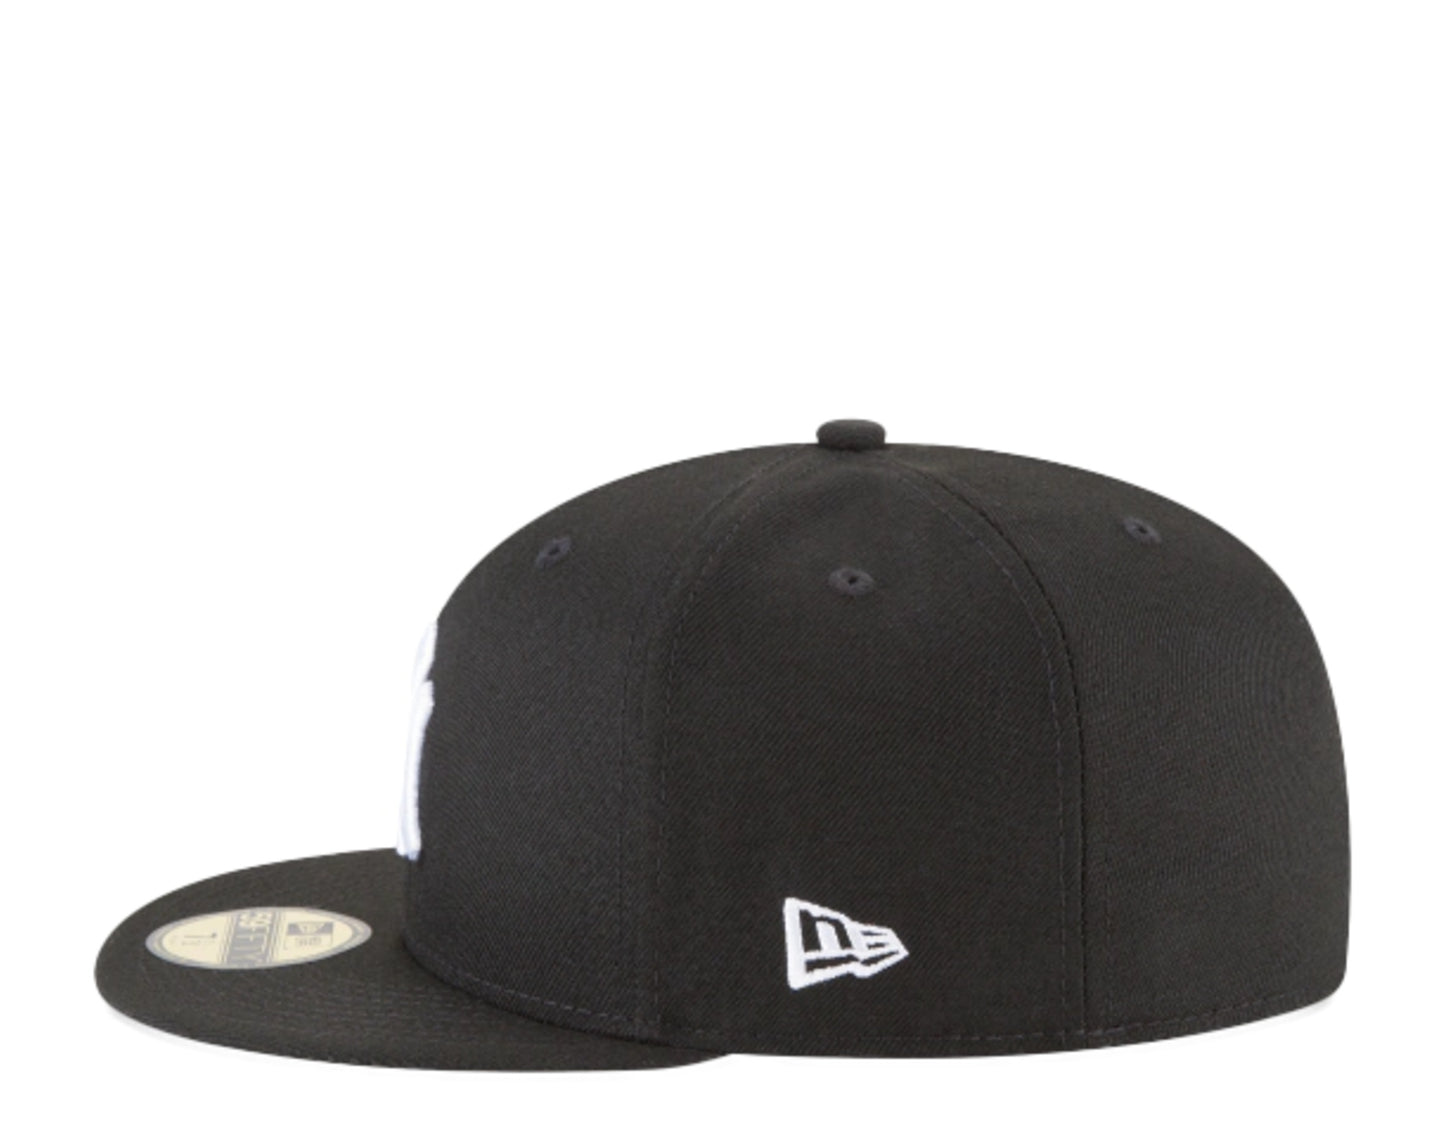 New Era 59Fifty MLB New York Yankees Black And White Basic Fitted Hat